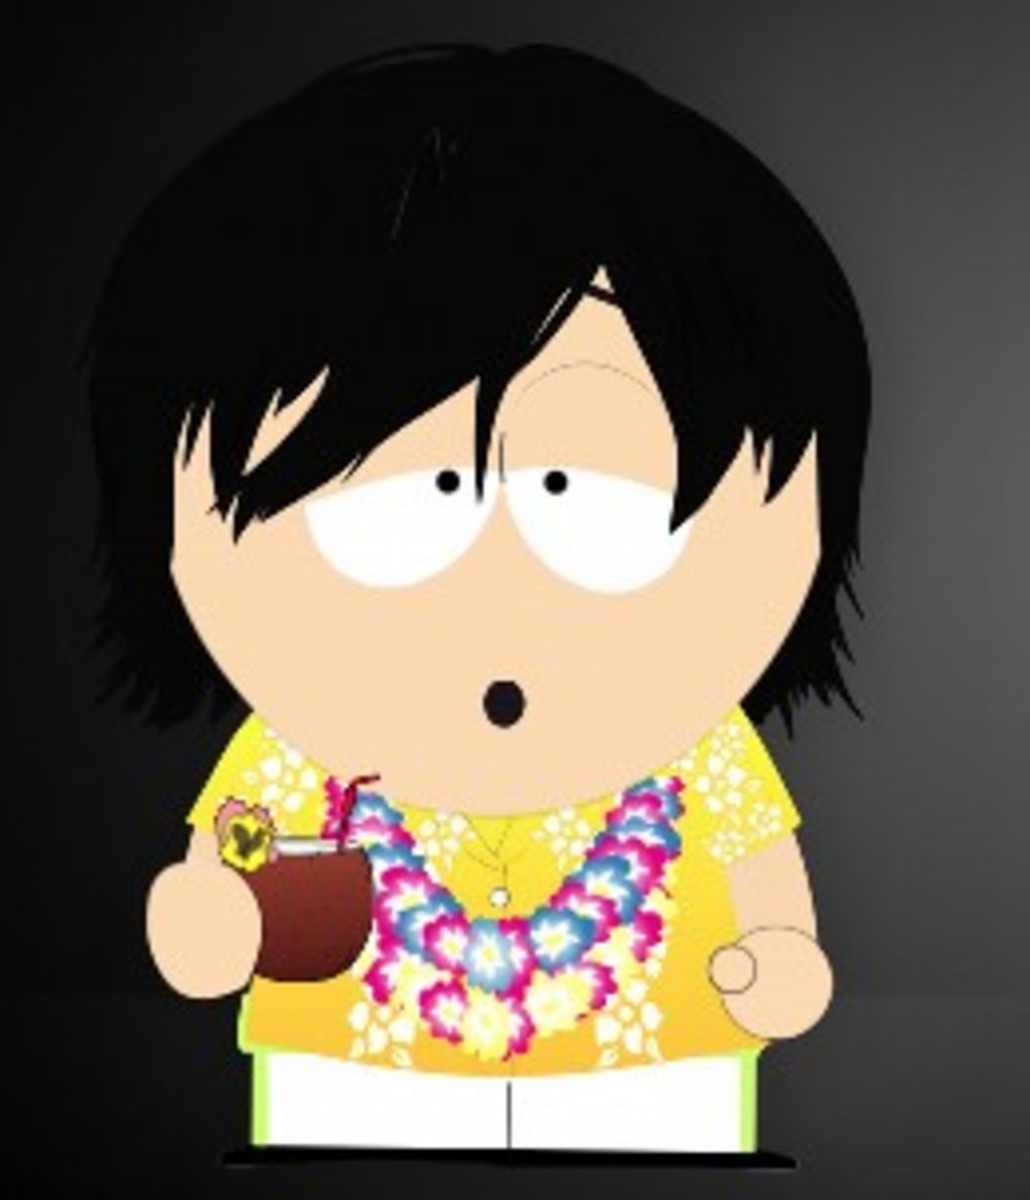 South Park avatar that I made using this tool.